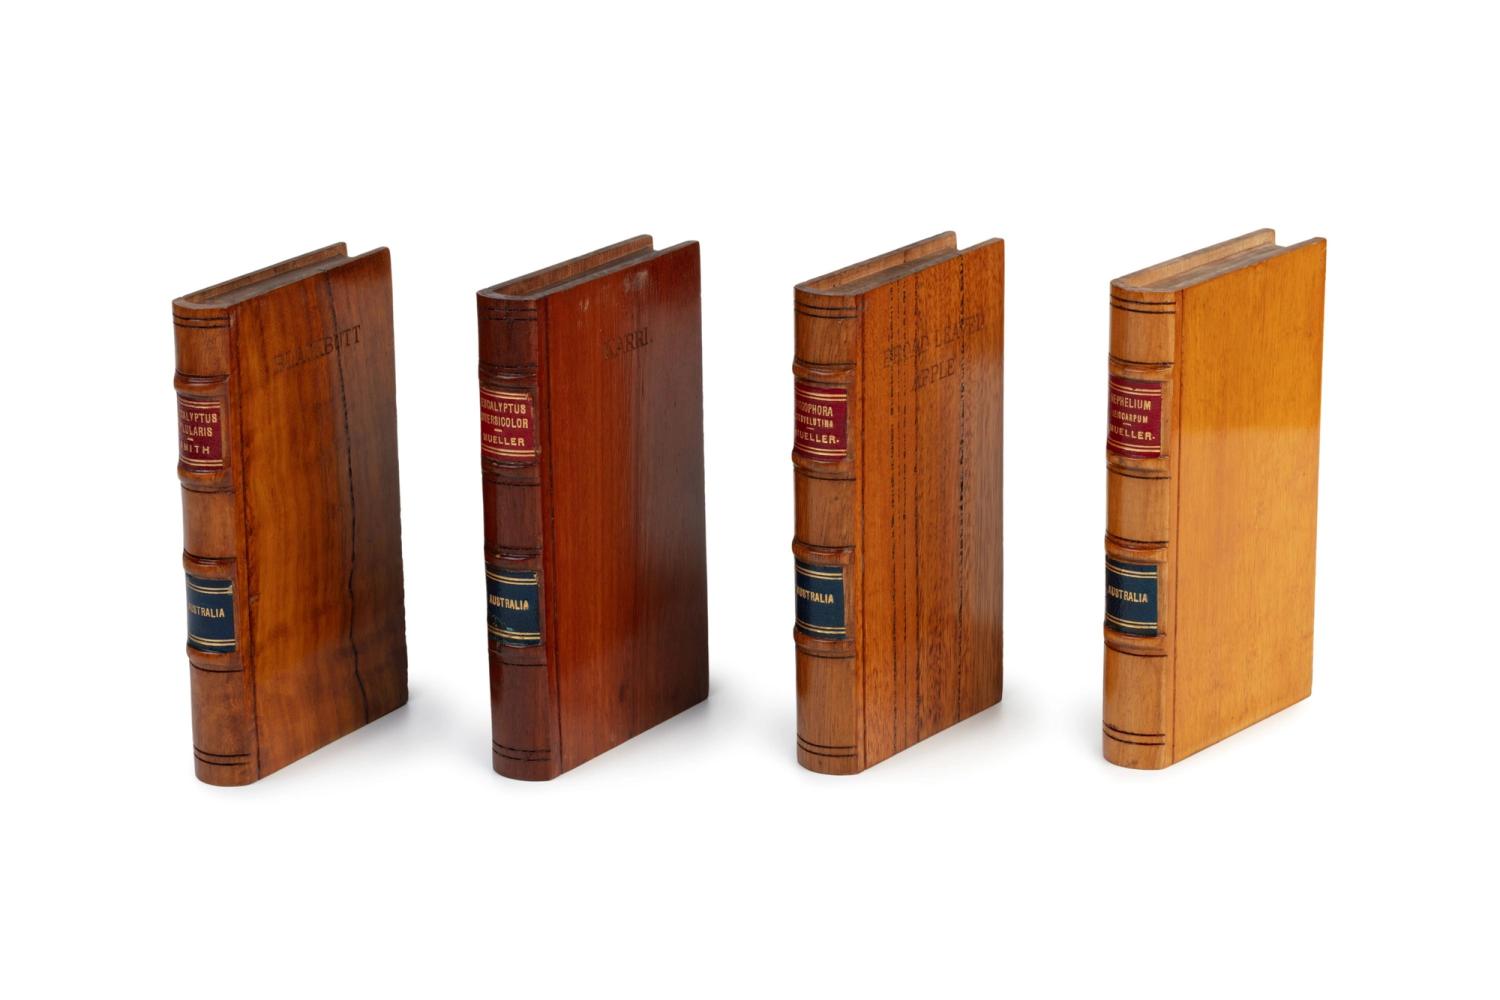 wooden books lined up. Object No. 86/1341 Collection of Australian timber samples in the form of books